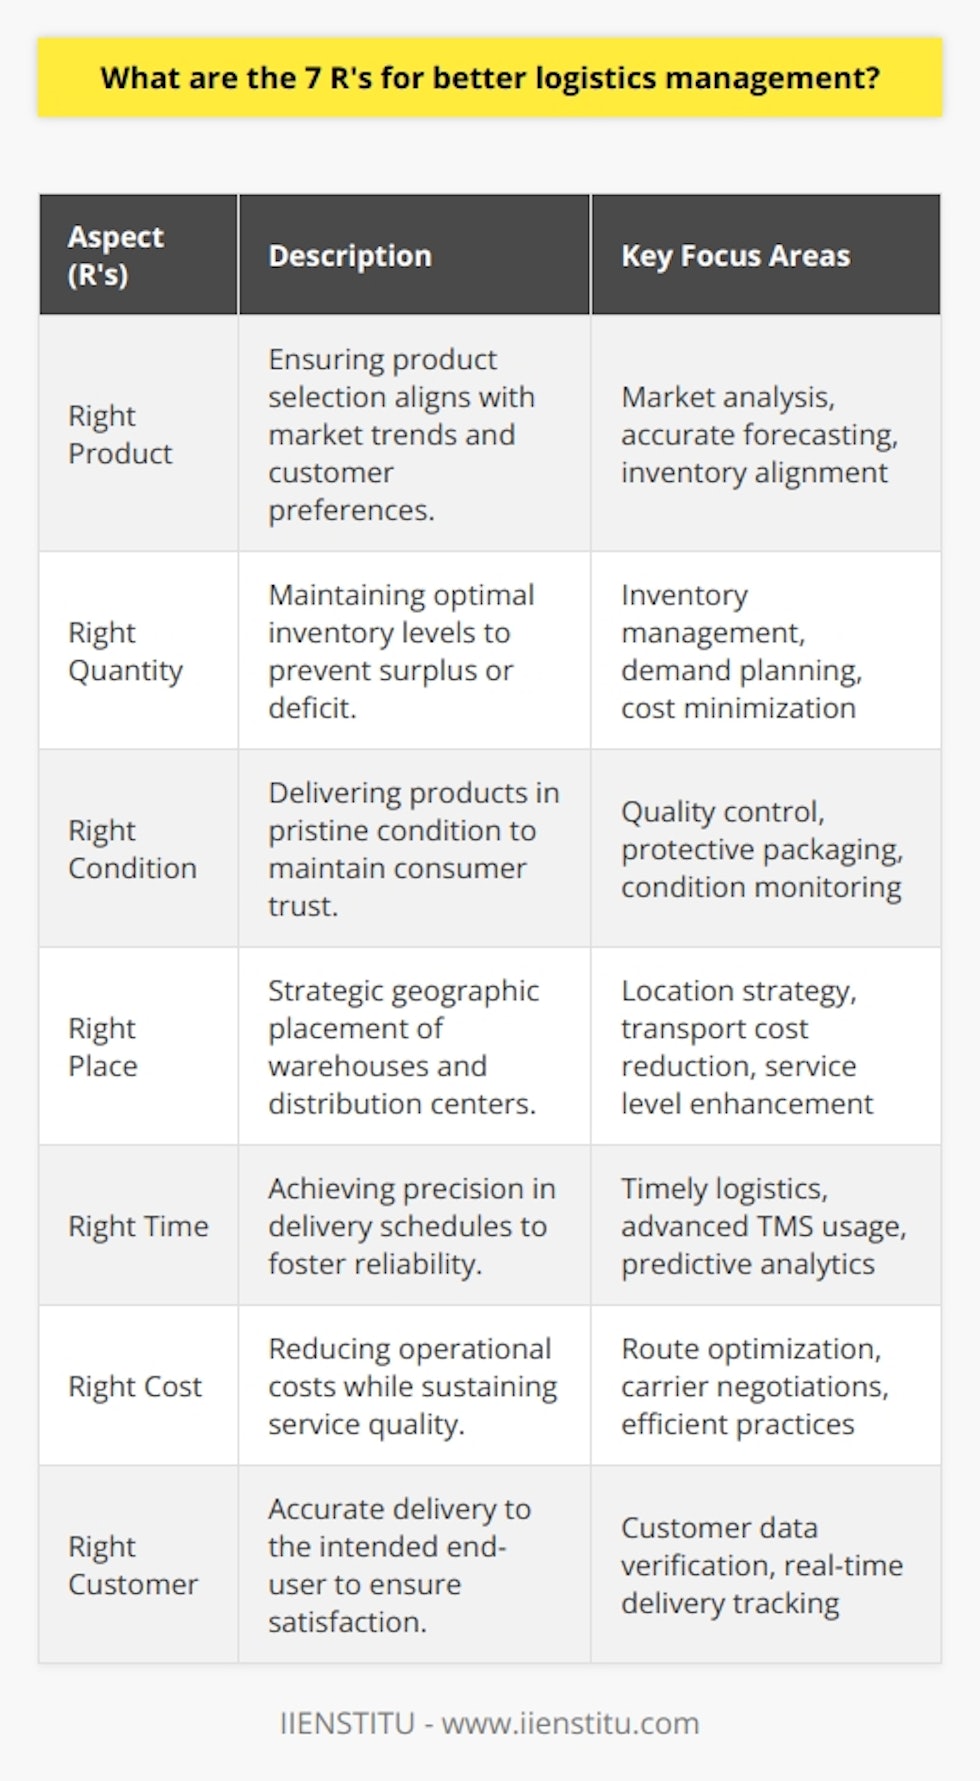 In the field of logistics management, the 7 R’s are a fundamental guidepost that helps businesses optimize supply chains and deliver value more efficiently to customers. Each of the R’s stands for a particular aspect that needs attention to ensure smooth logistical flow. Let’s delve into these seven pillars:**Right Product**Selecting the appropriate product is vital in meeting customer needs and driving satisfaction. Understanding market trends and customer preferences is essential to ensure that inventory is aligned with demand. Accurate forecasting is a cornerstone of this pillar, helping to avoid stockouts or overstock situations.**Right Quantity**Inventory management is a delicate balancing act that directly affects logistics. Proper planning regarding the right quantity is essential to avoid excess cost in holding inventories and reducing waste. Sophisticated inventory management systems often come into play here, allowing for more precise demand planning and responsive restocking procedures.**Right Condition**The integrity of a product upon delivery heavily influences consumer trust and brand reputation. Ensuring that products are well-maintained, properly packaged, and shielded from potential damage is therefore crucial. Several factors contribute to this, including humidity control, shock detection, and temperature monitoring during transit.**Right Place**Location strategy is a critical component, as it influences transport costs and delivery efficacy. Establishing warehouses and distribution centers closer to key markets or along major transport routes can greatly enhance logistical performance. This strategic geographic placement goes hand-in-hand with better service levels to customers.**Right Time**Precision timing in logistics is non-negotiable. Anticipating and meeting delivery schedules helps build trust and reliability with customers. The use of advanced TMS, as well as predictive analytics, can enable more precise time management and help manage customer expectations effectively.**Right Cost**Profitability and cost management are intertwined in logistics. Finding ways to reduce costs without compromising service quality requires a multi-faceted approach. This can include route optimization, carrier contract negotiations, and the implementation of efficient logistics practices to streamline operations and reduce waste.**Right Customer**Lastly, ensuring that the right product reaches the right end-user is paramount. Errors in customer information or delivery addresses can lead to dissatisfied customers and increased costs related to returns and reshipments. In this context, digital solutions that verify customer data and track deliveries in real-time serve as invaluable tools for impeccable service delivery.By mastering the 7 R's, businesses can foster a robust logistics framework that not only supports current operational needs but also delivers agility and resilience in the face of evolving market demands. Adopting these principles can subsequently lead to competitive advantages, sustainability, and customer loyalty—cornerstones for long-term business success.